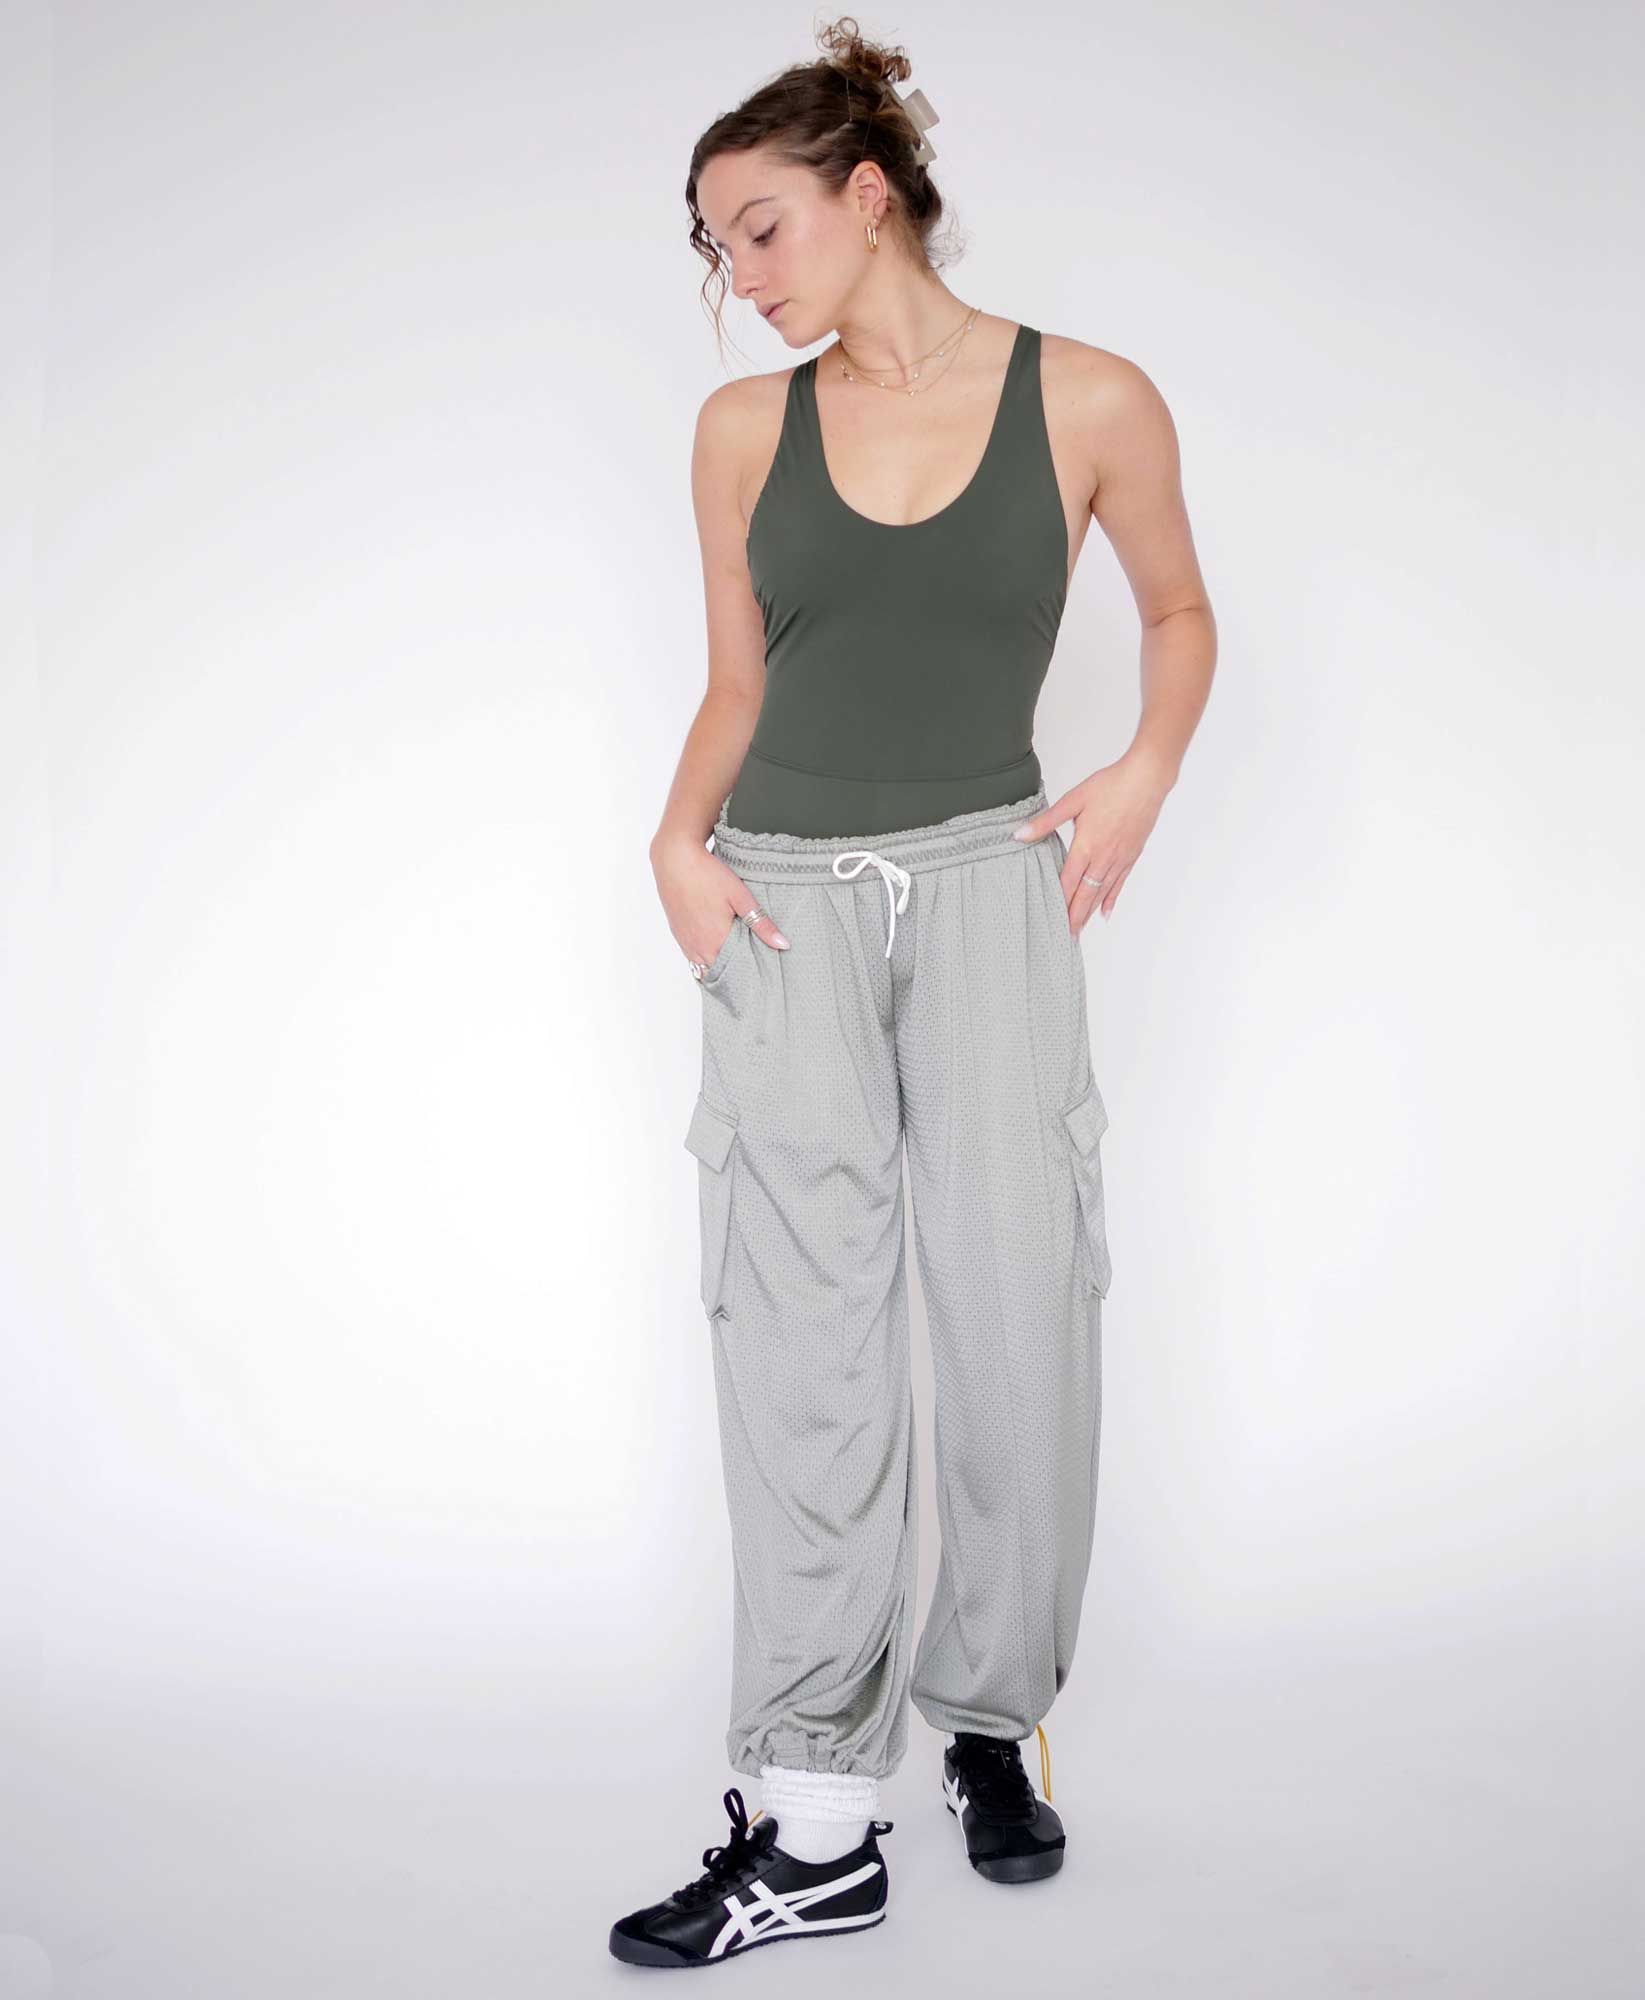 Wear One's At Arena Pant in Mineral Grey on Model Looking Down Full Front View